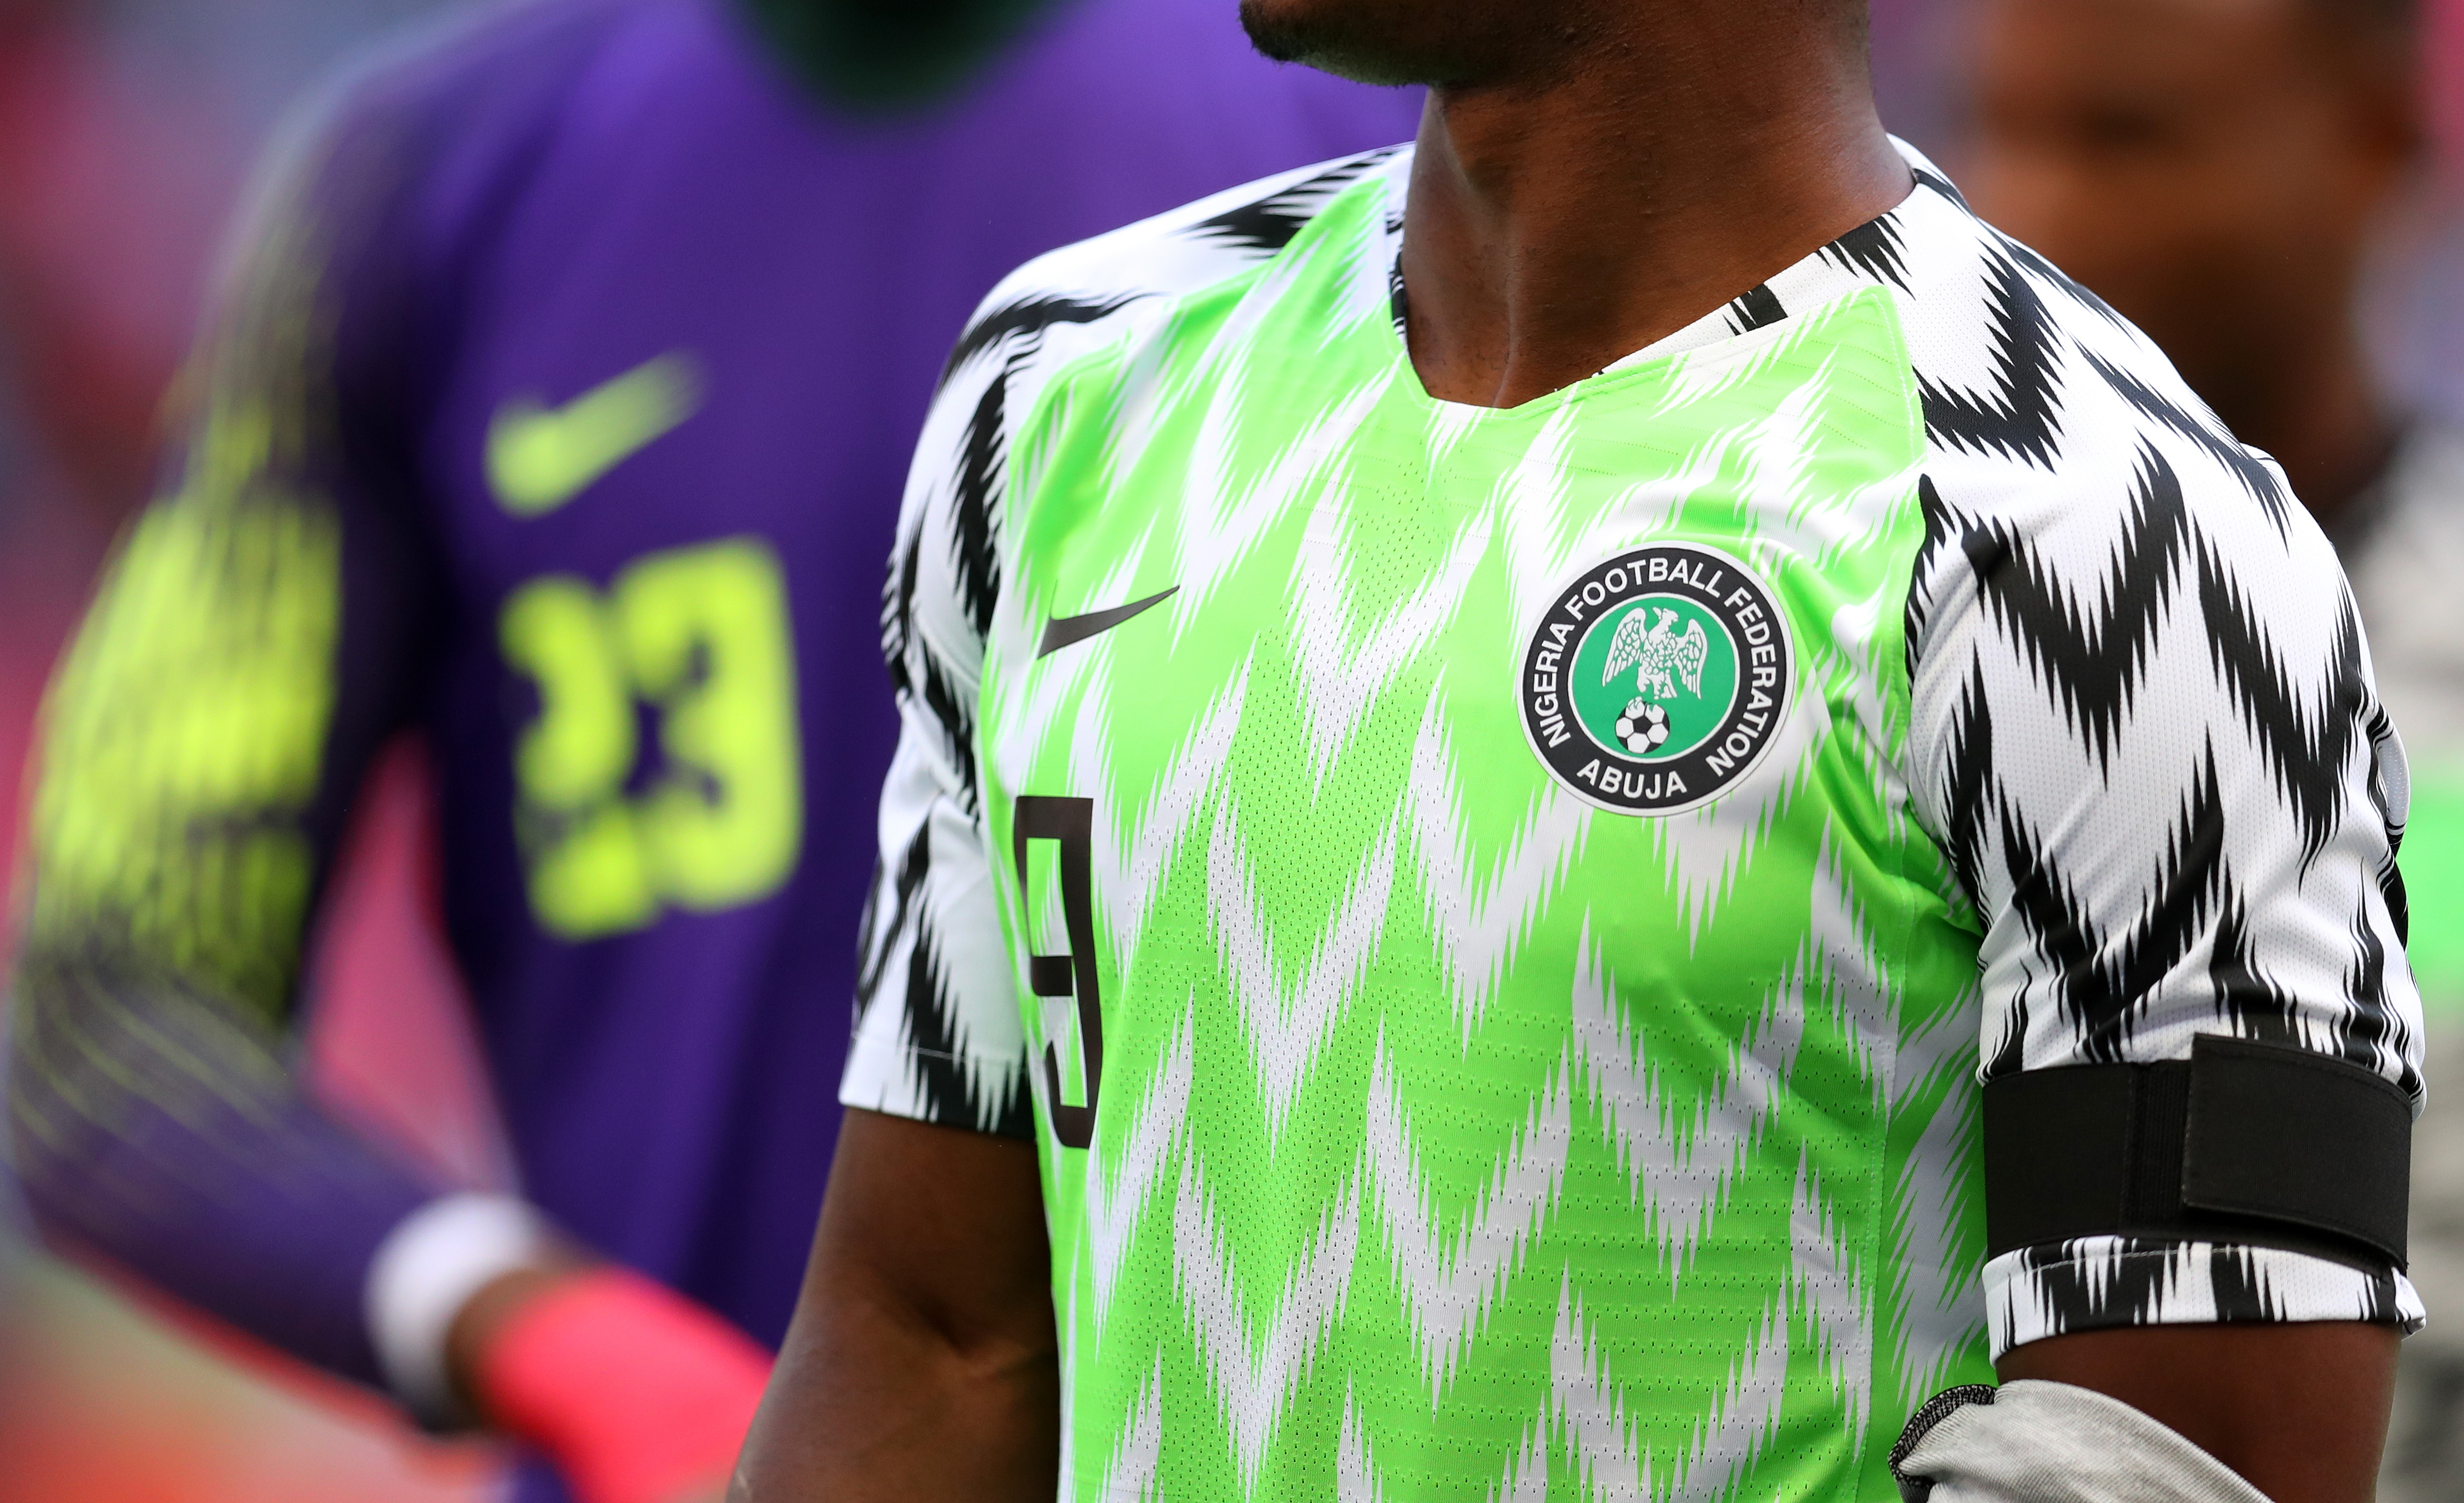 Detail of the Nigeria badge and shirt during the international friendly match between England and Nigeria at Wembley Stadium on June 2, 2018 in London, England. (Catherine Ivill—Getty Images)